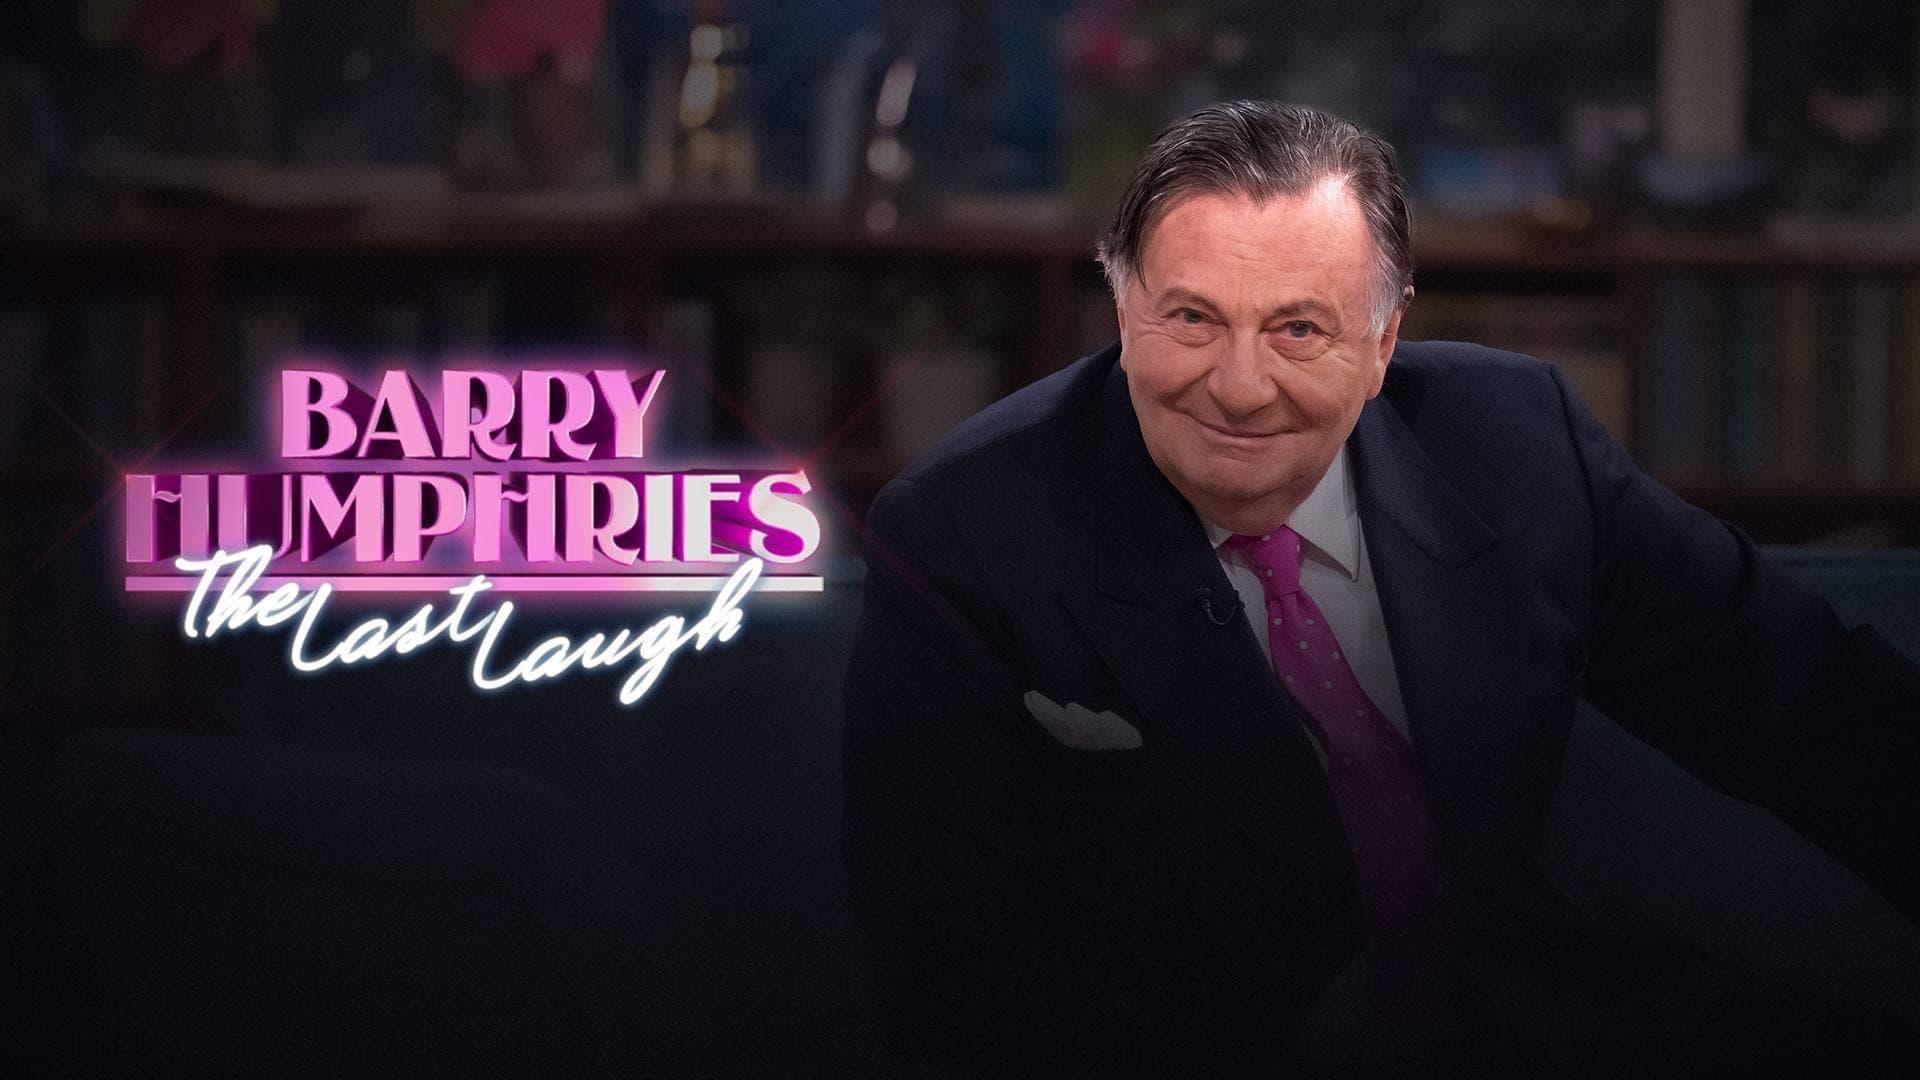 Barry Humphries: The Last Laugh backdrop